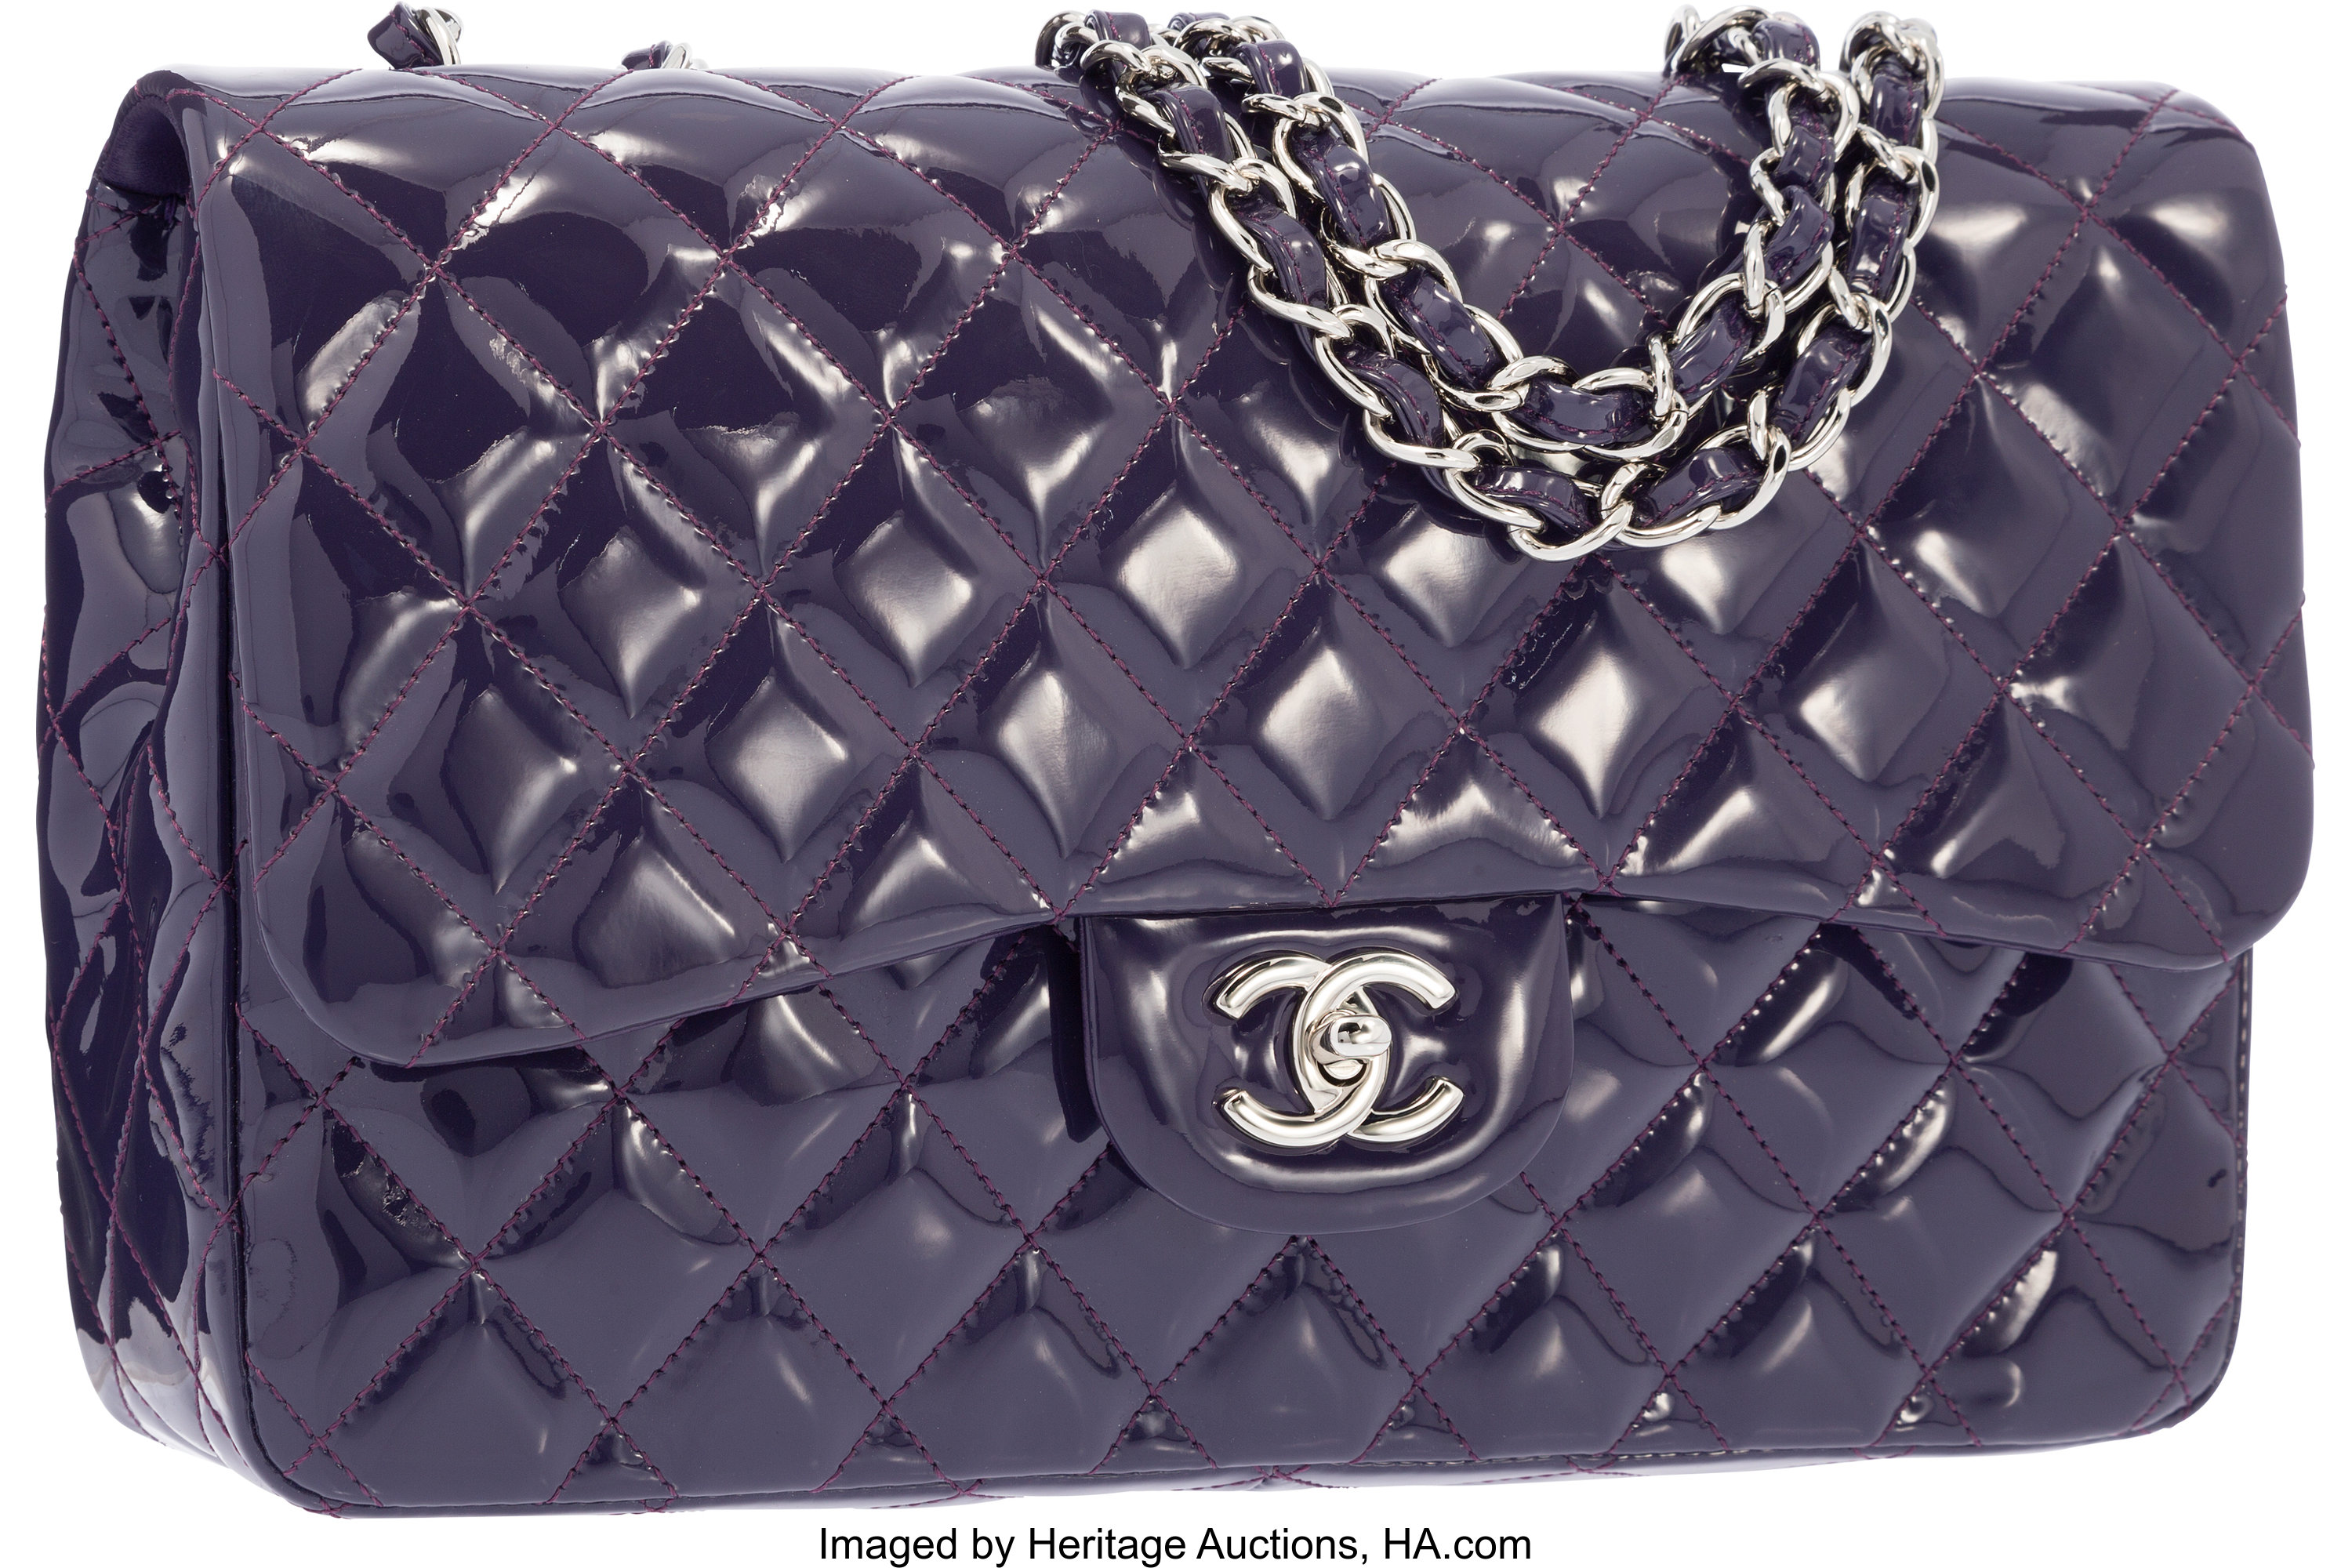 Chanel Purple Quilted Patent Leather Jumbo Single Flap Bag with